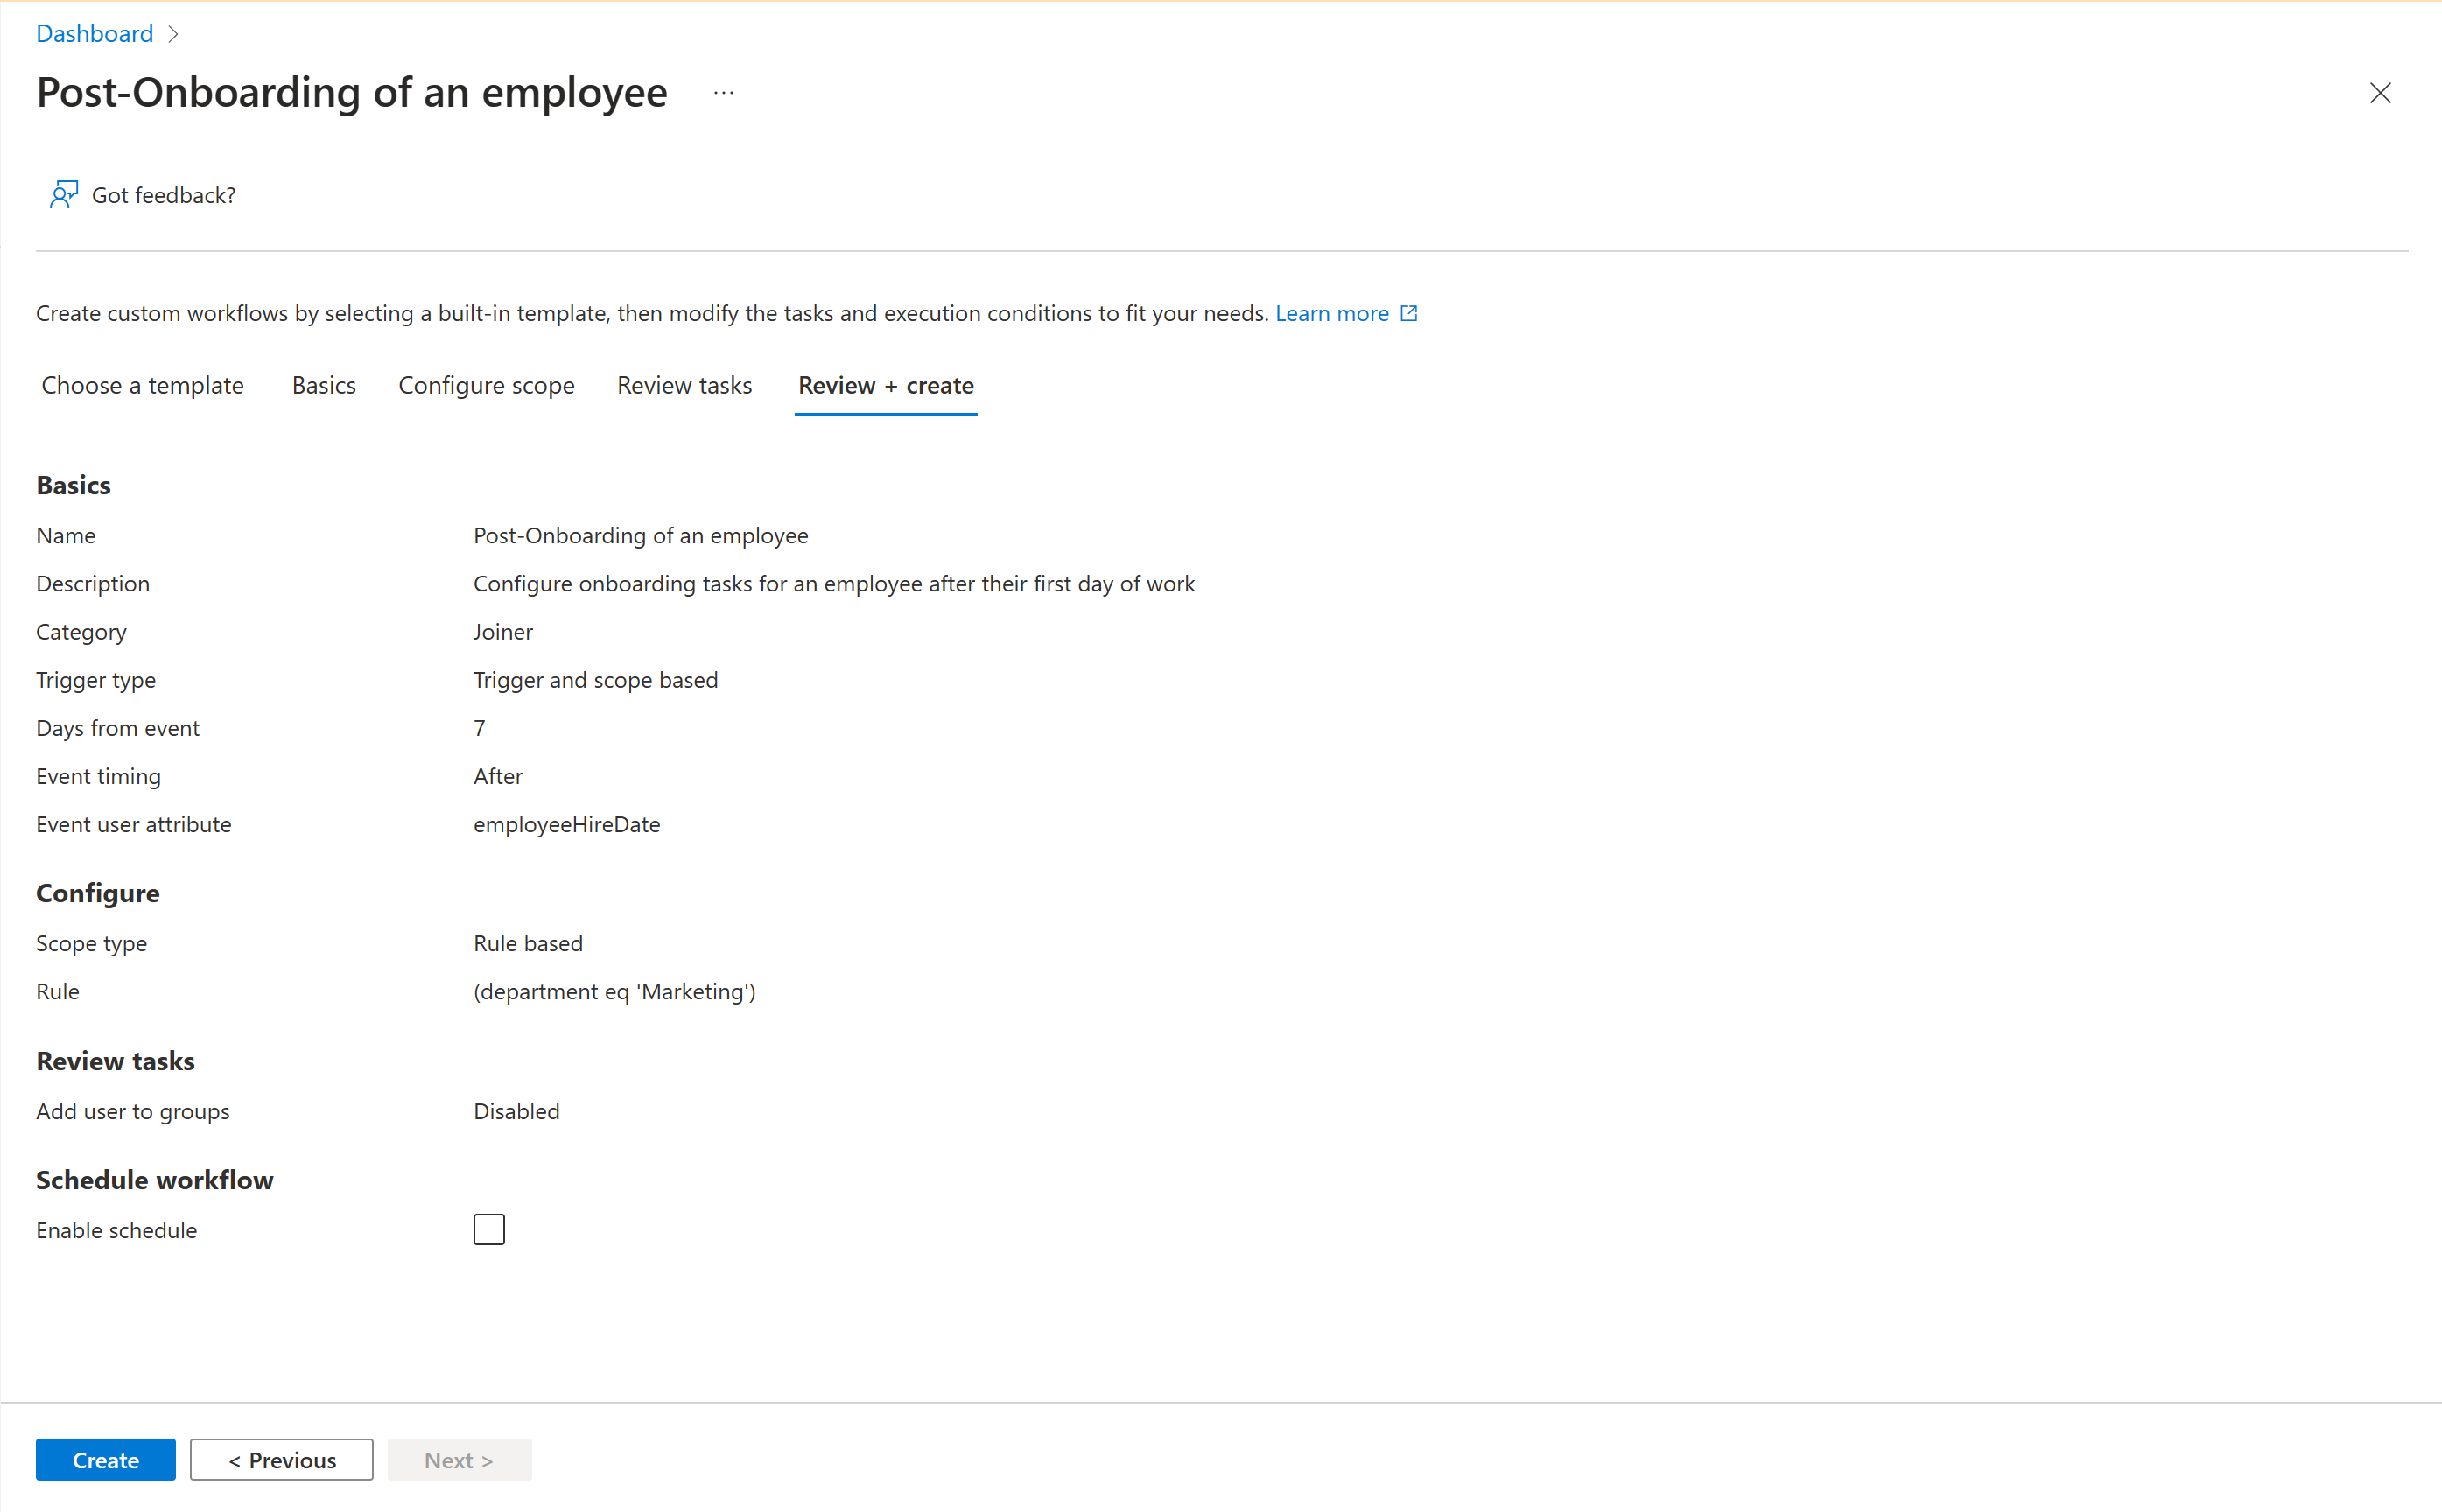 Screenshot of a Lifecycle Workflow post-onboard new hire template.